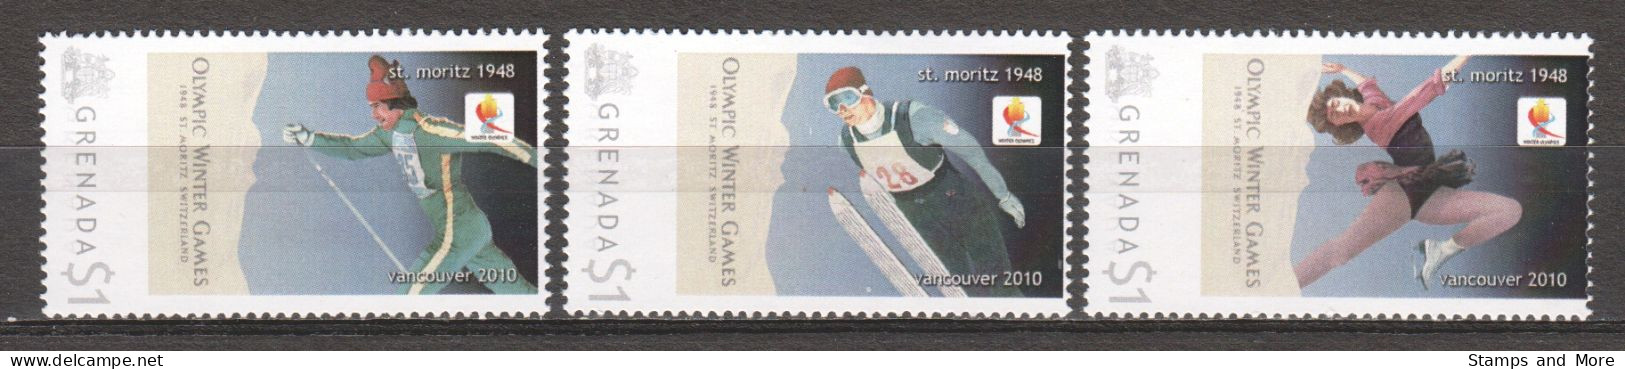 Grenada - Limited Edition Serie 05 MNH - WINTER OLYMPICS VANCOUVER 2010 - ST MORITZ 1948 - Winter 2010: Vancouver